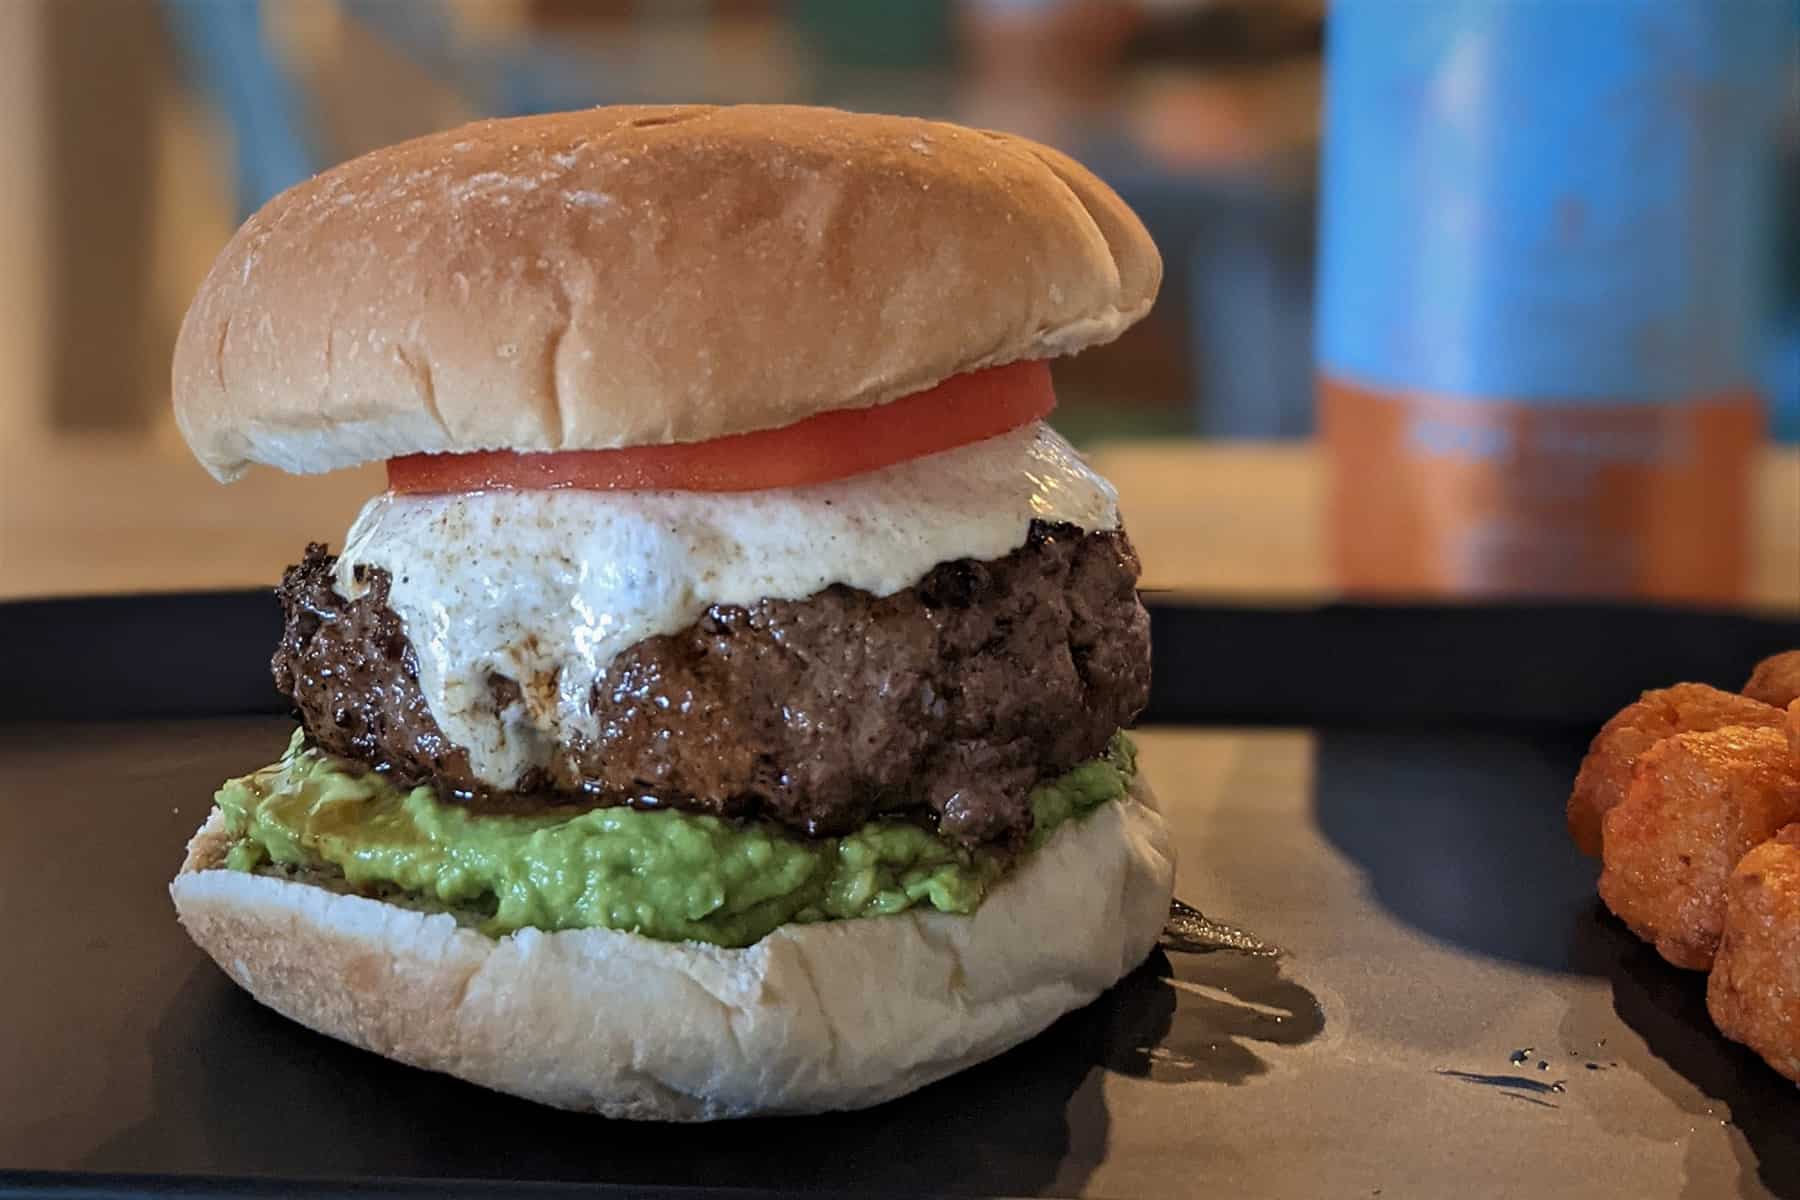 A juicy burger topped with mozzarella cheese, a fresh tomato slice, and mashed avocado